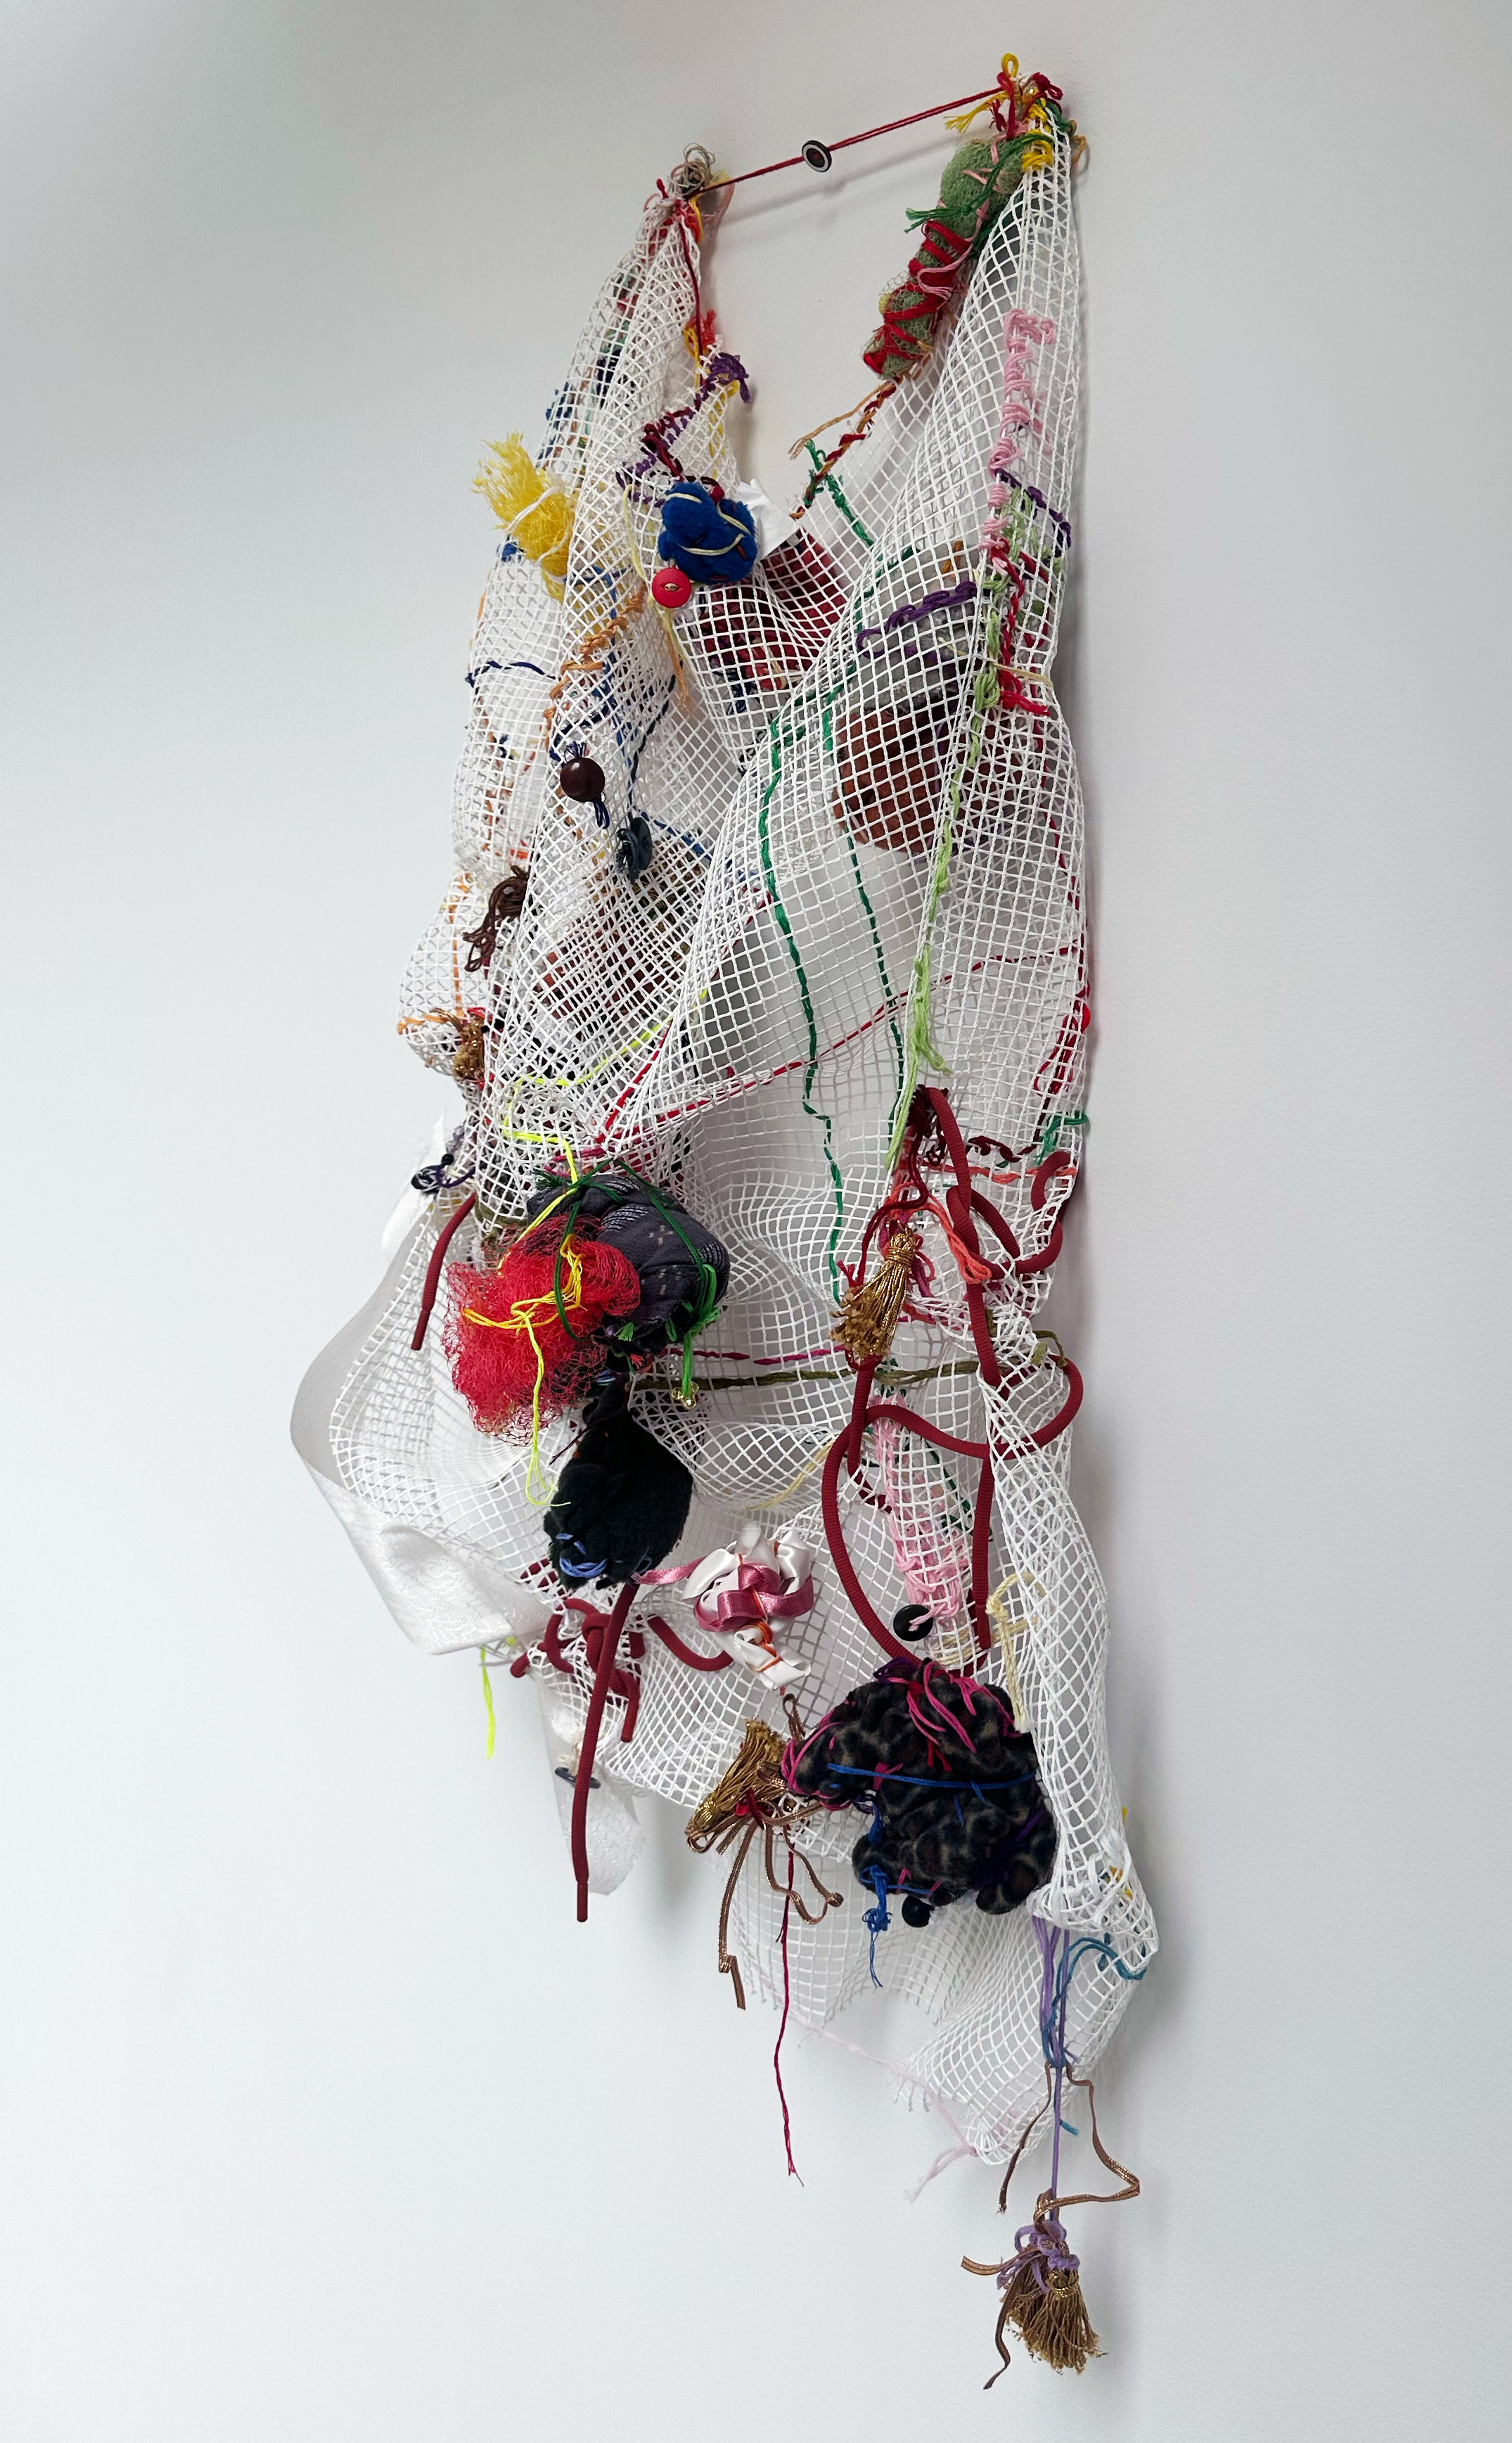 A sculpture made of netting, fabric, and various soft objects hanging on a wall.